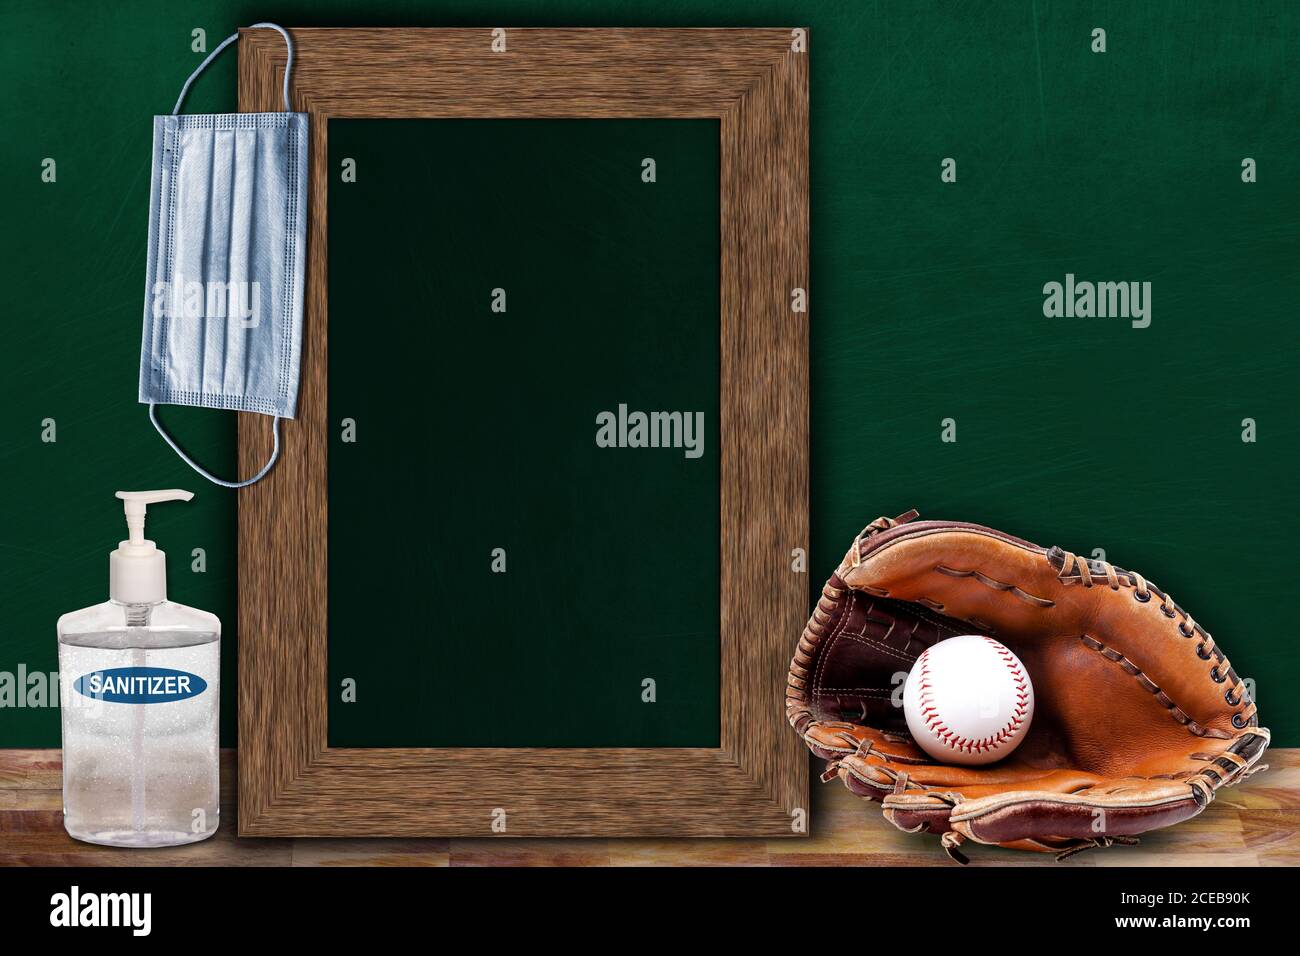 COVID-19 new normal sports concept in a classroom setting showing framed chalkboard with copy space and baseball glove and ball on wooden table. Stock Photo